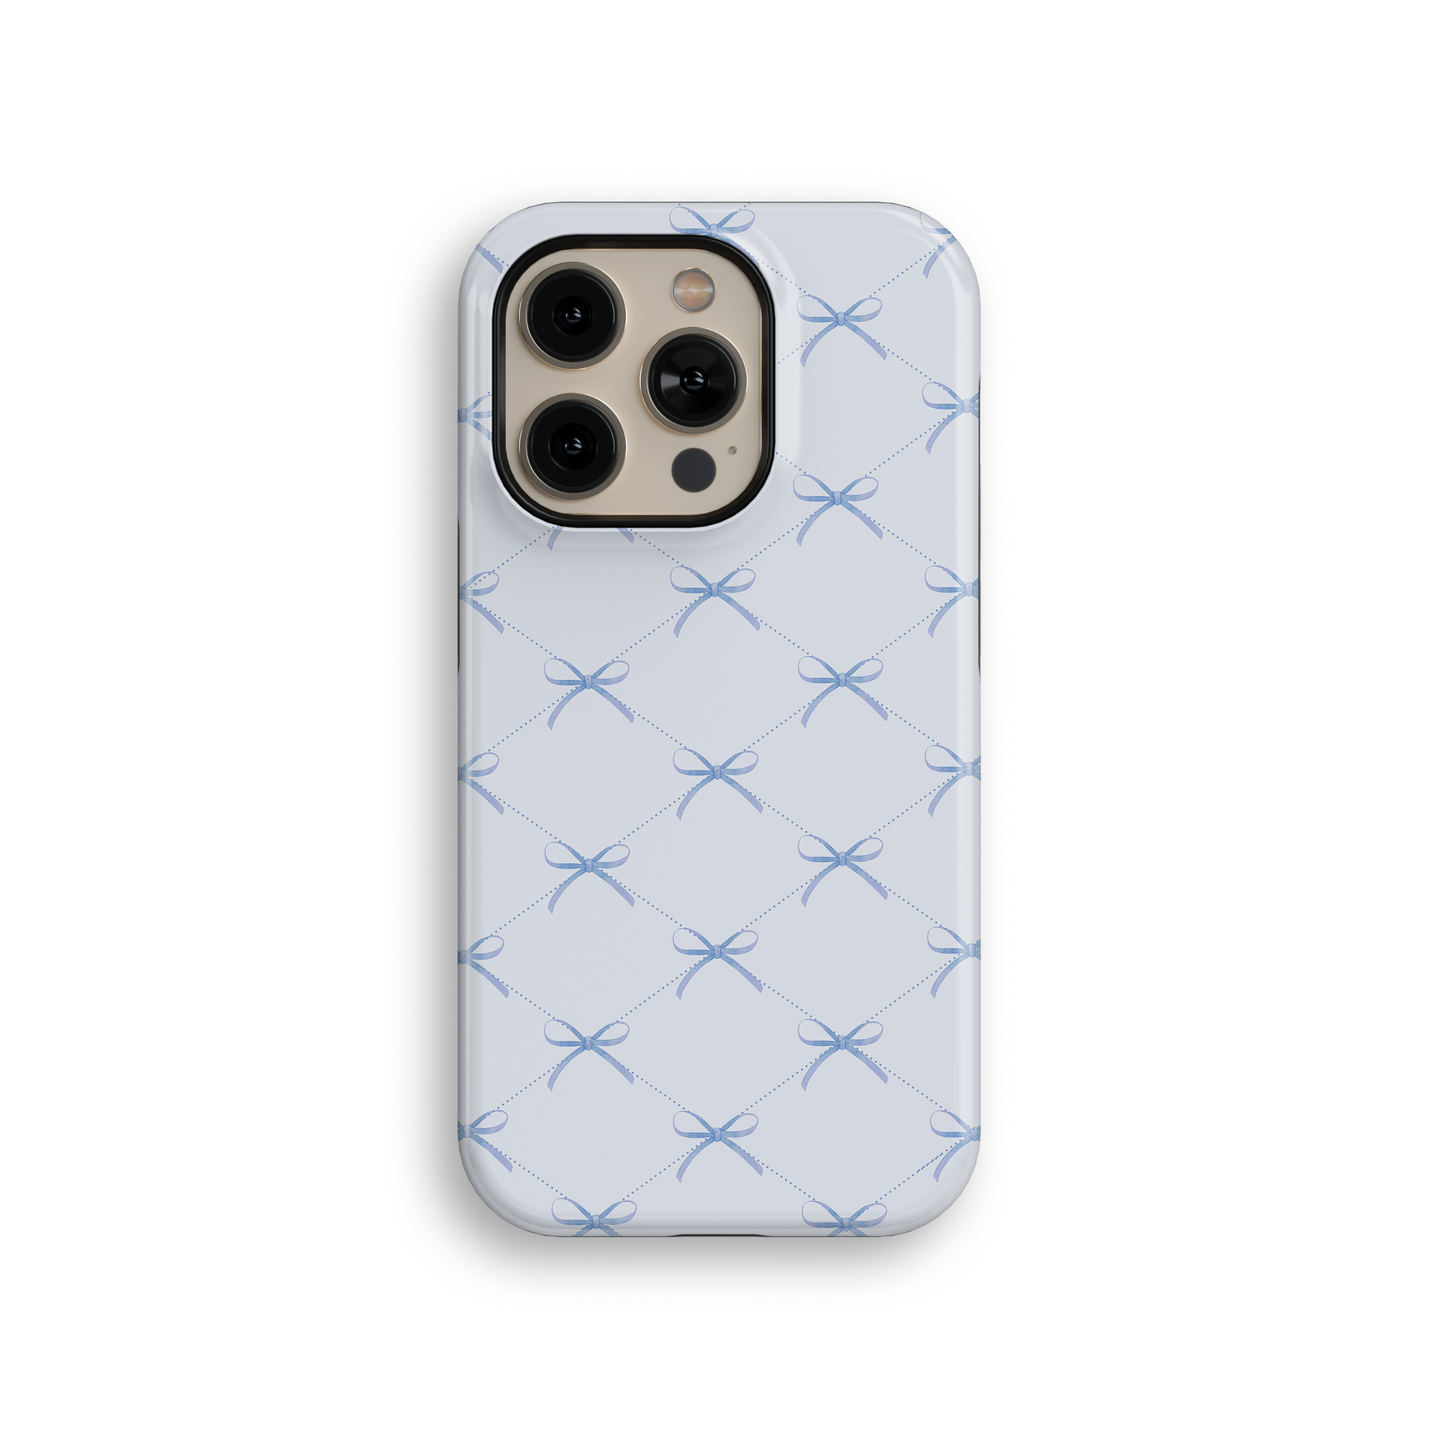 Put A Bow On It Tough iPhone Case